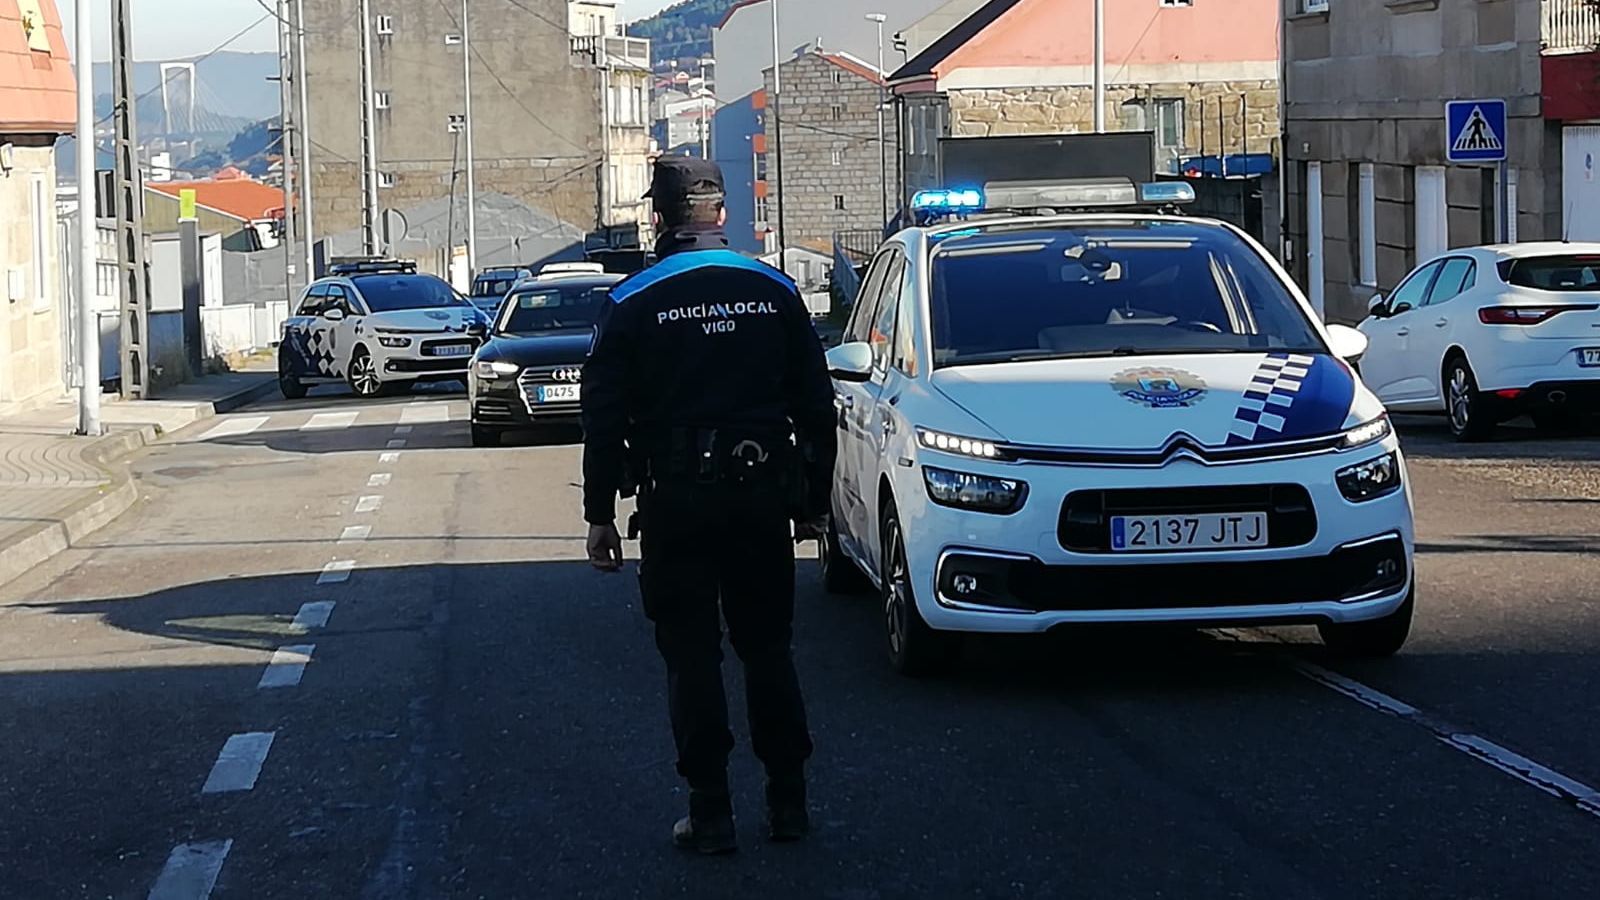 A young man arrested in Vigo after making a ‘simpa’ to a taxi driver when returning from a nightclub